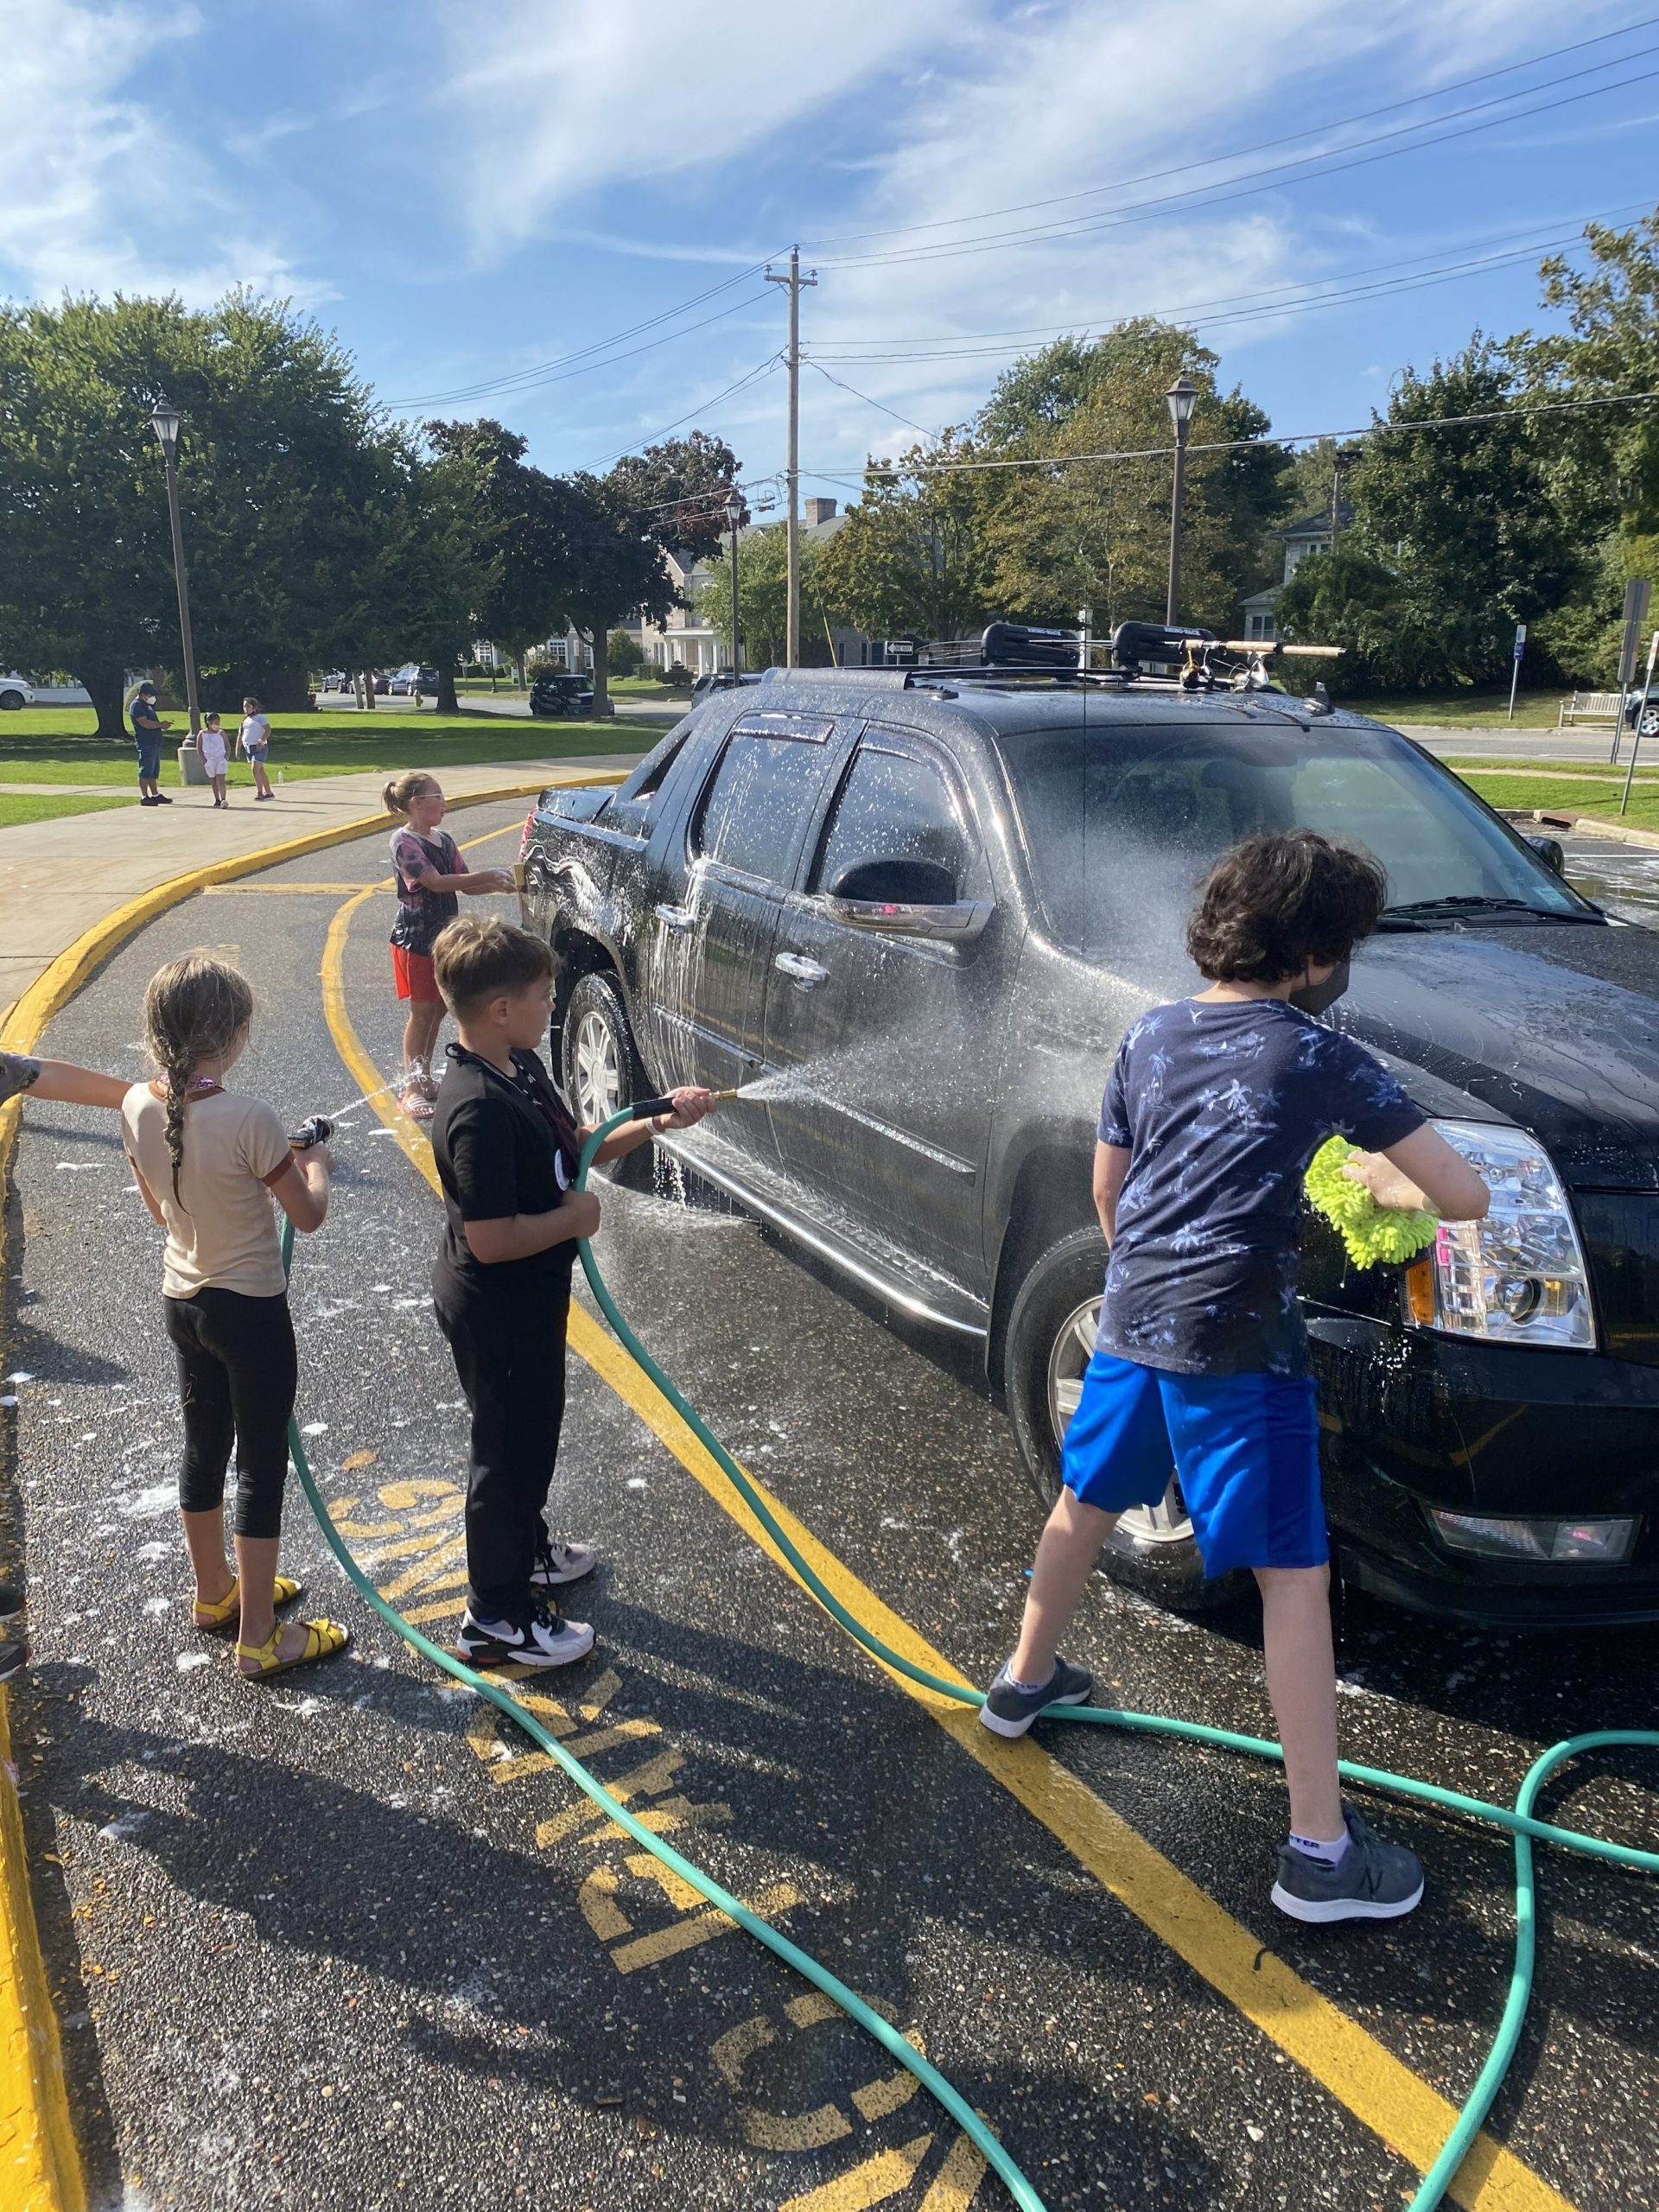 Students from Southampton Elementary School and Southampton Intermediate School teamed up with the Southampton High School field hockey team and the Southampton Rotary Club to hold a car wash fundraiser on October 2 for Lucia’s Angels, a nonprofit breast cancer foundation. The car wash yielded $1,950 for the organization.